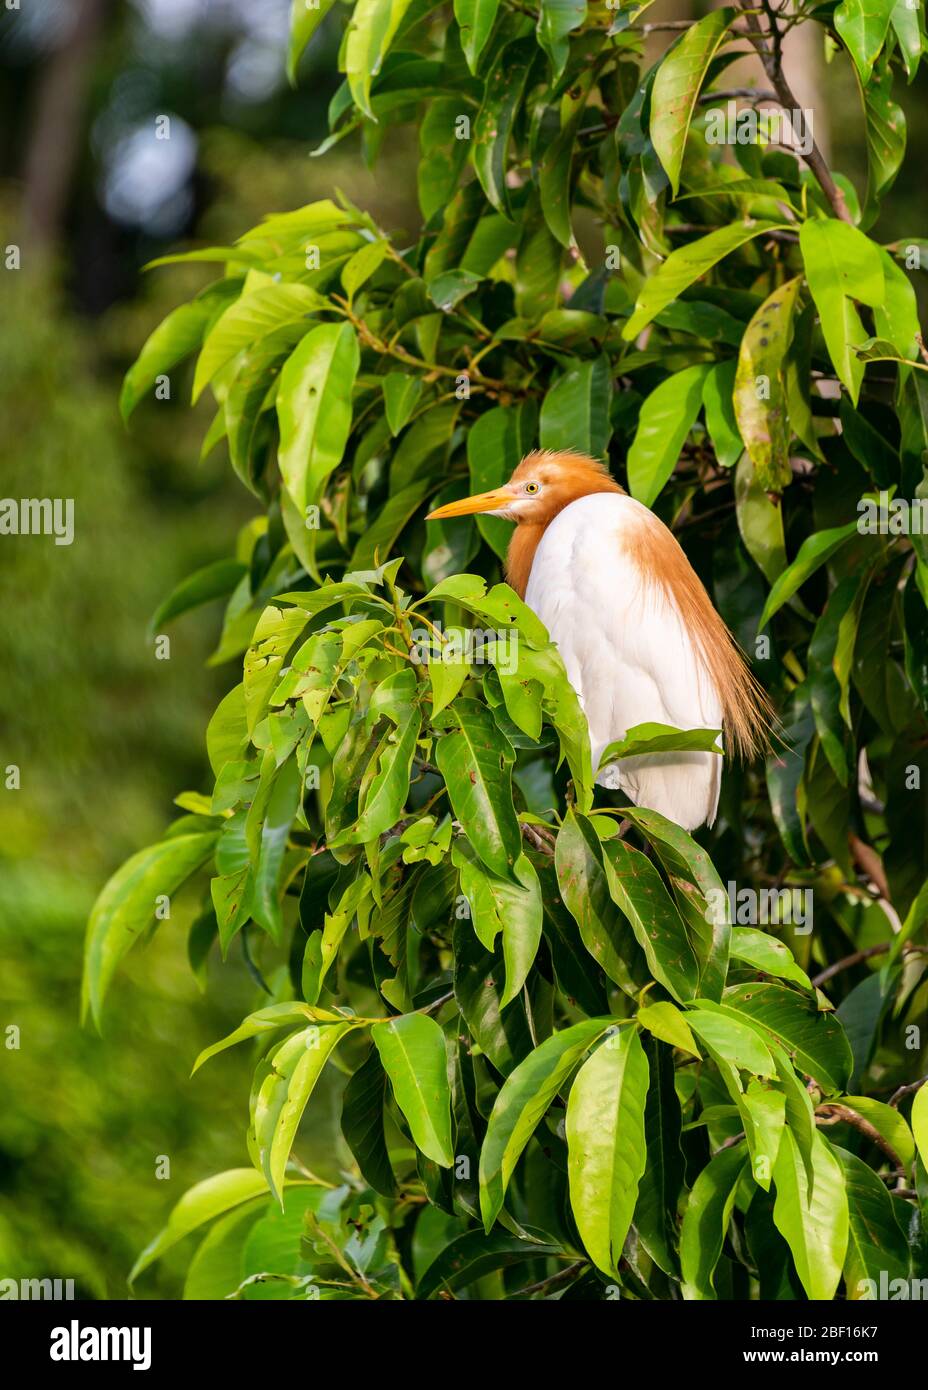 Vertical close up of a Cattle Egret in Bali, Indonesia. Stock Photo